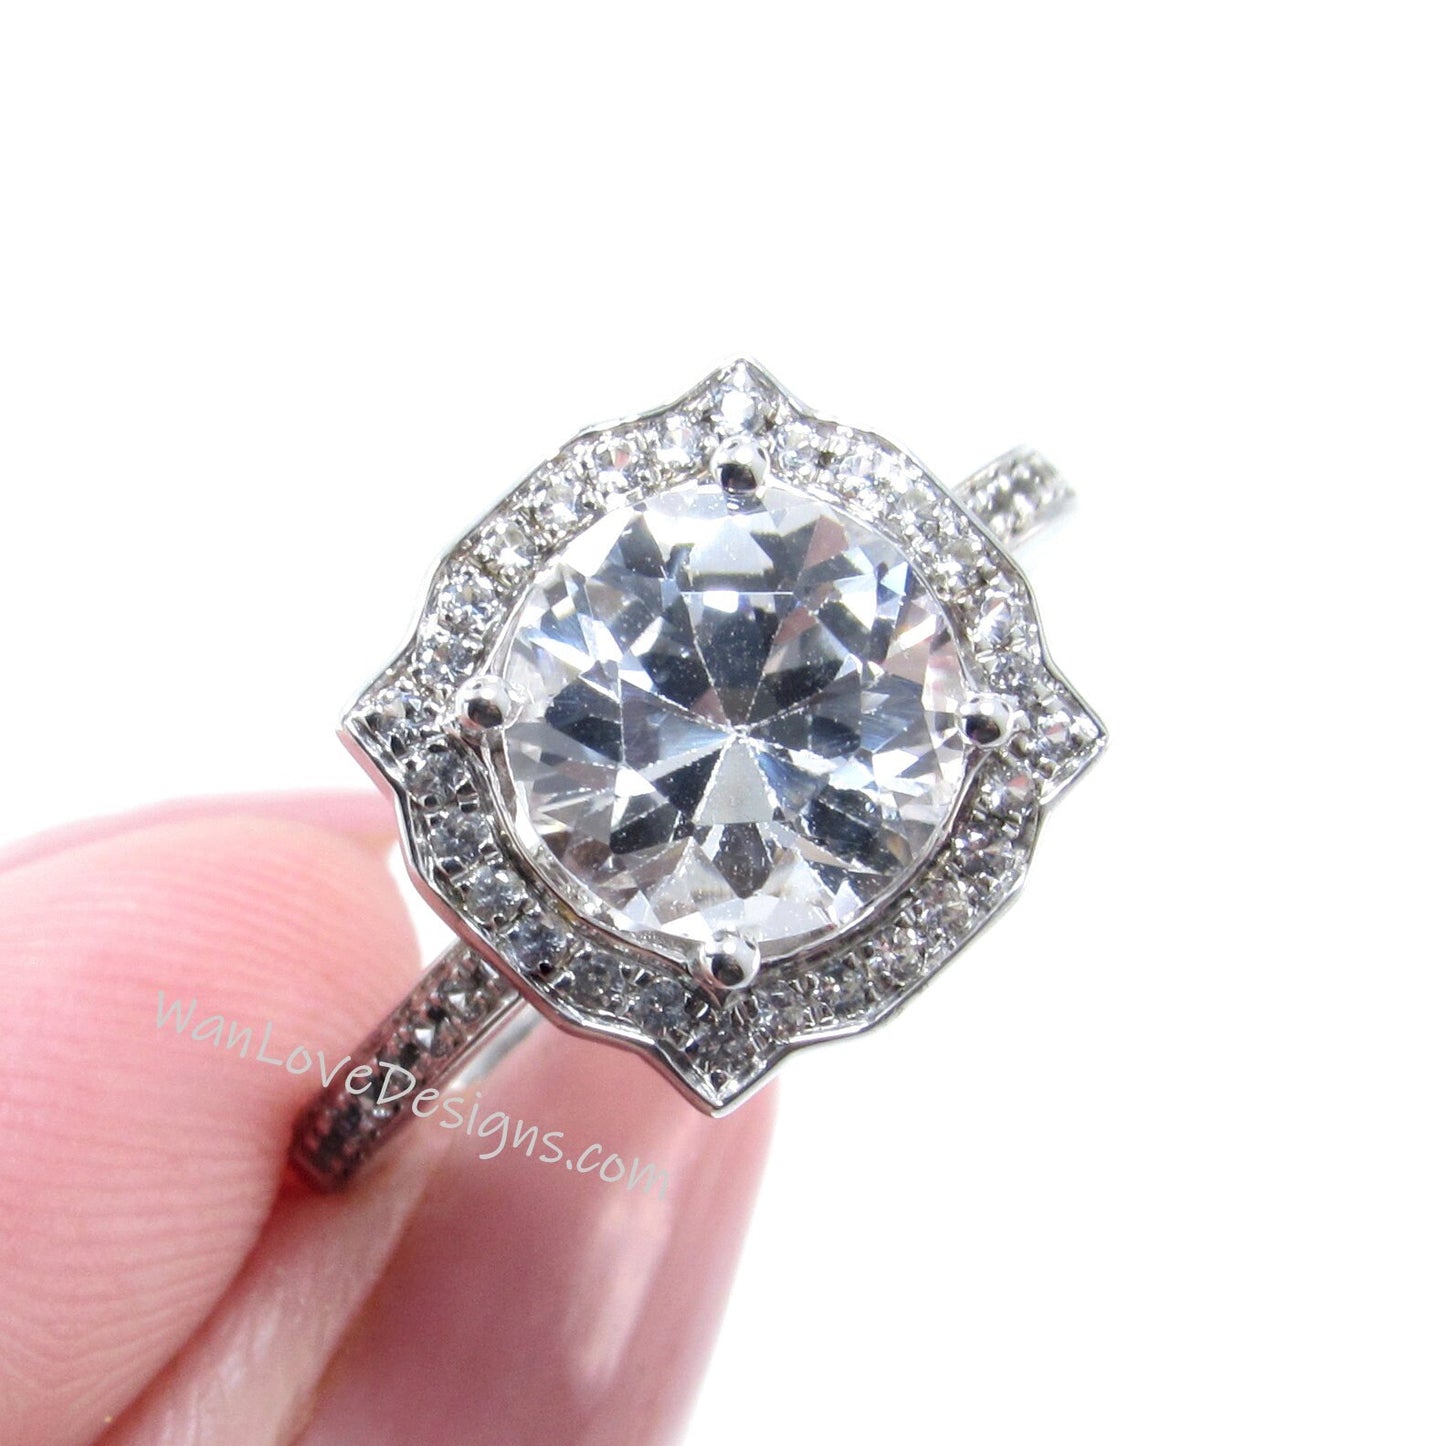 White Sapphire Antique Bezel Frame Engagement Ring-Basket-Vintage-Round Halo Ring-2ct-8mm-Silver Rhodium-Anniversary-Ready to Ship